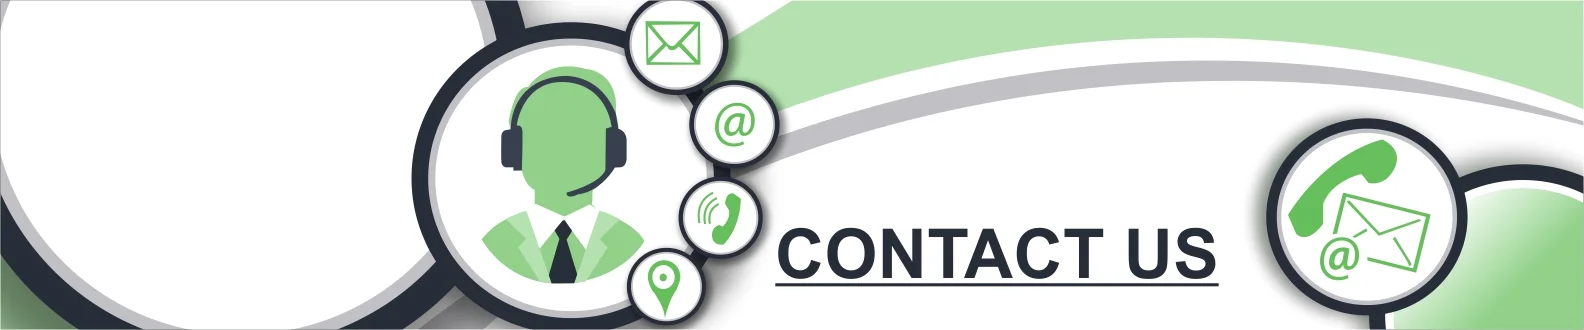 contact-banner-image